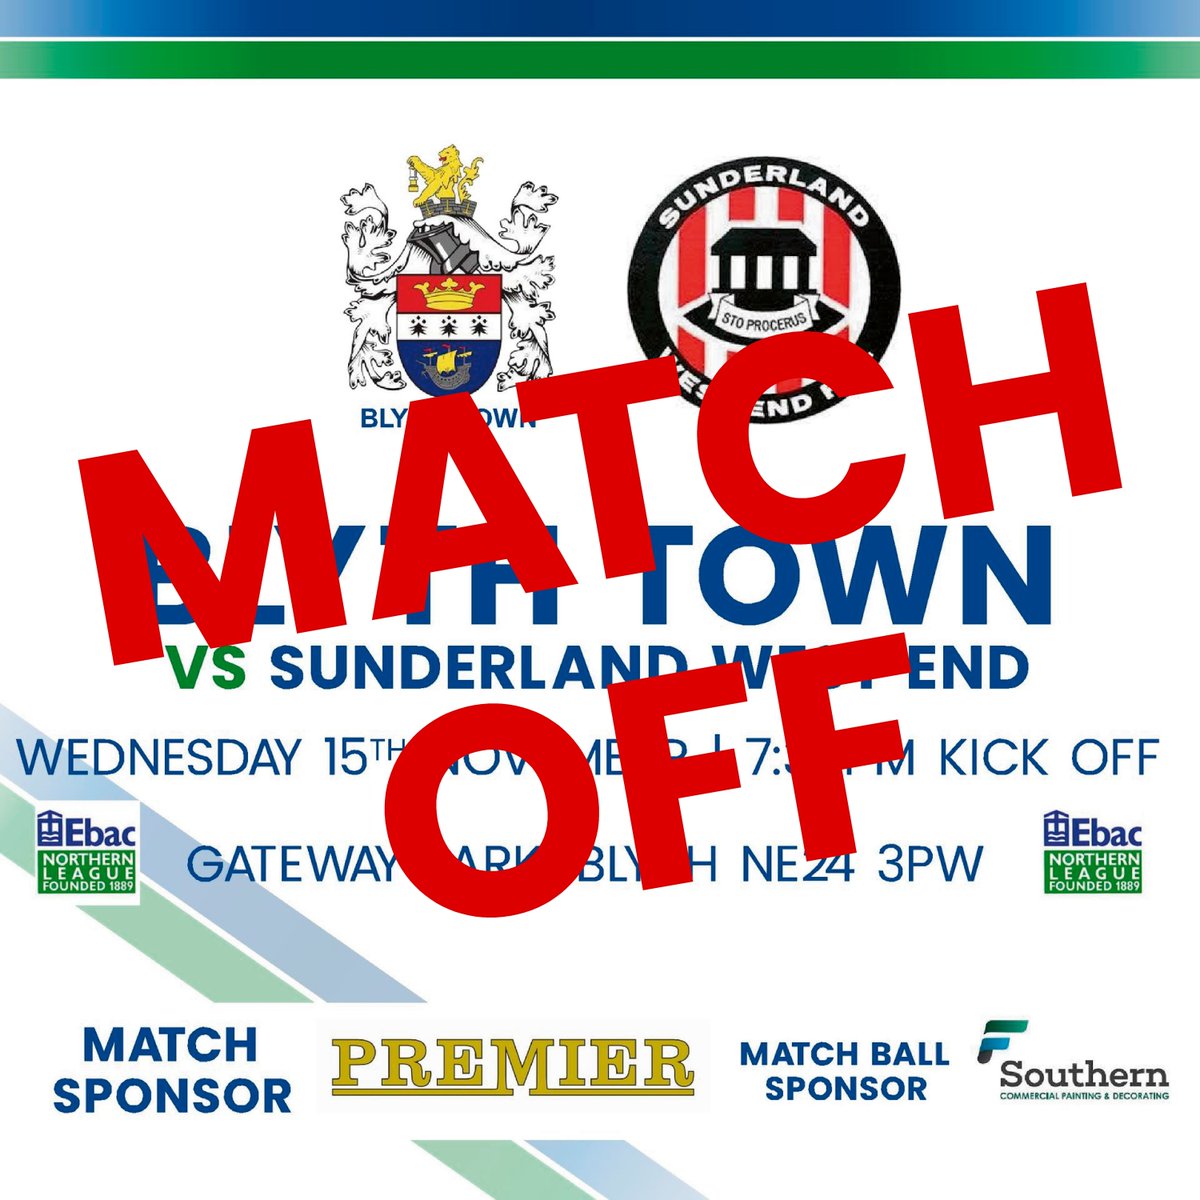 Unfortunately , tonight's match at Home to Sunderland West End has been called off due to a waterlogged pitch.